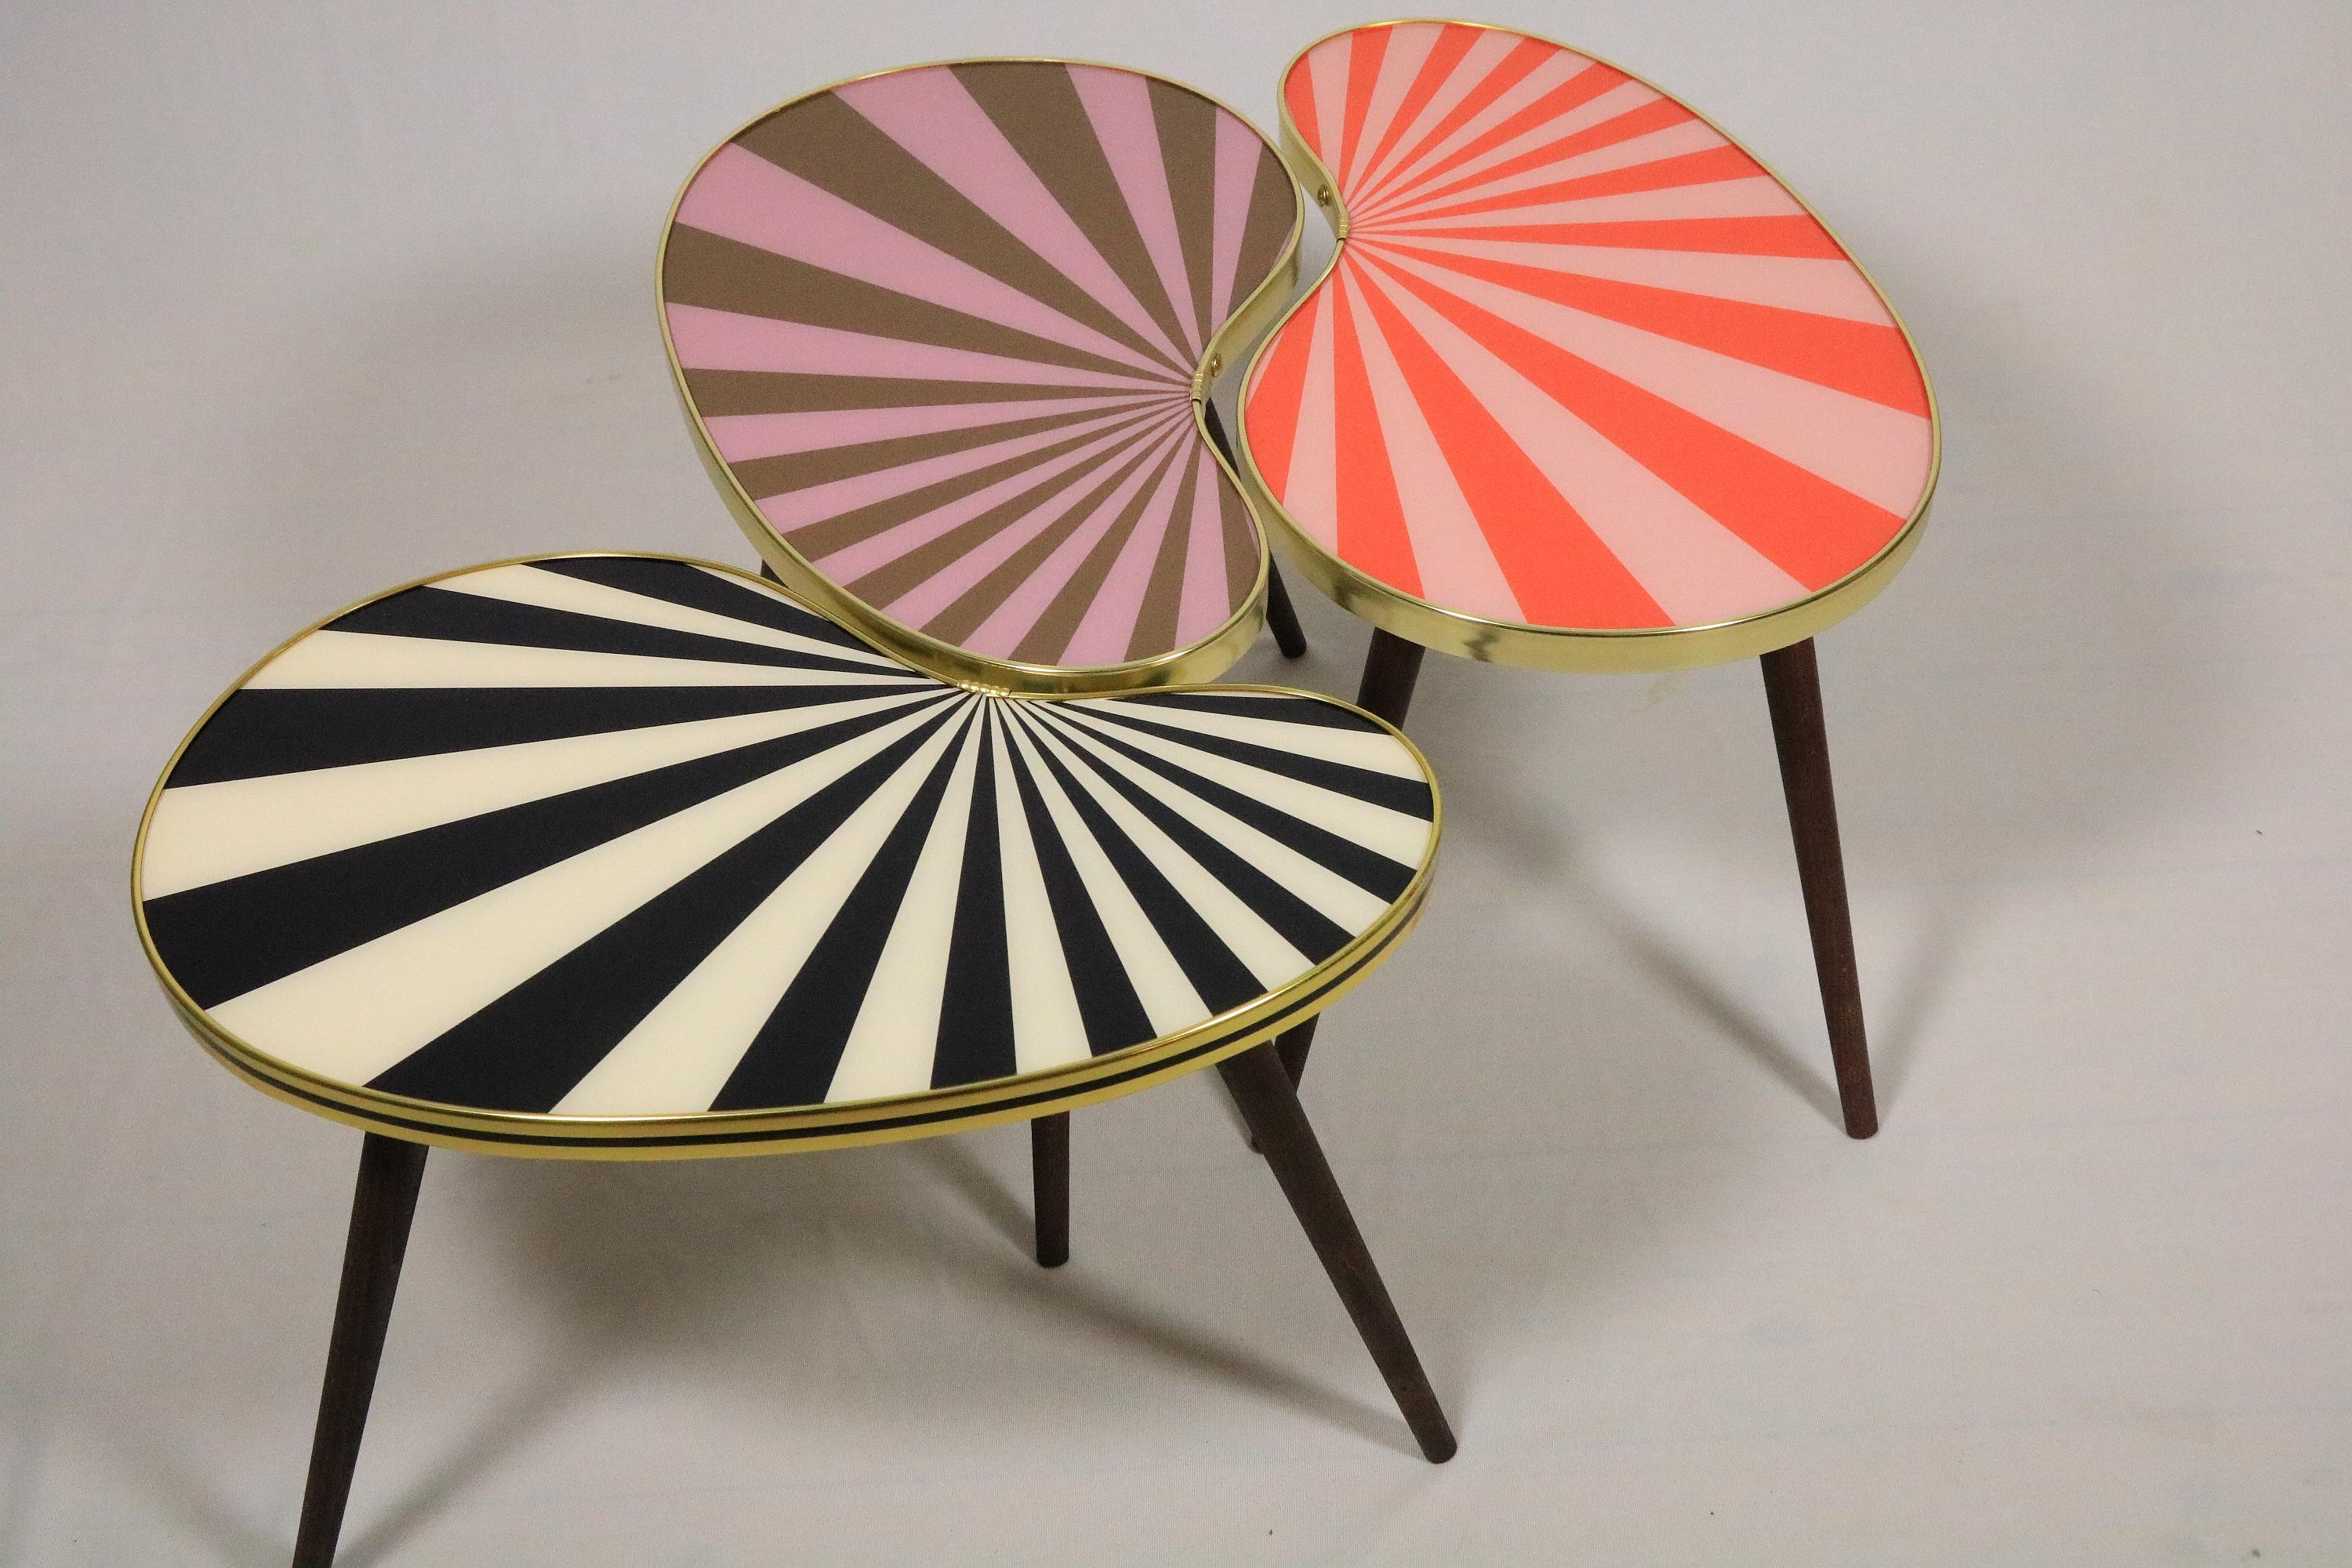 Small Side Table, Kidney Shaped, Pink-Taupe Stripes, 3 Elegant Legs, 50s Style For Sale 1